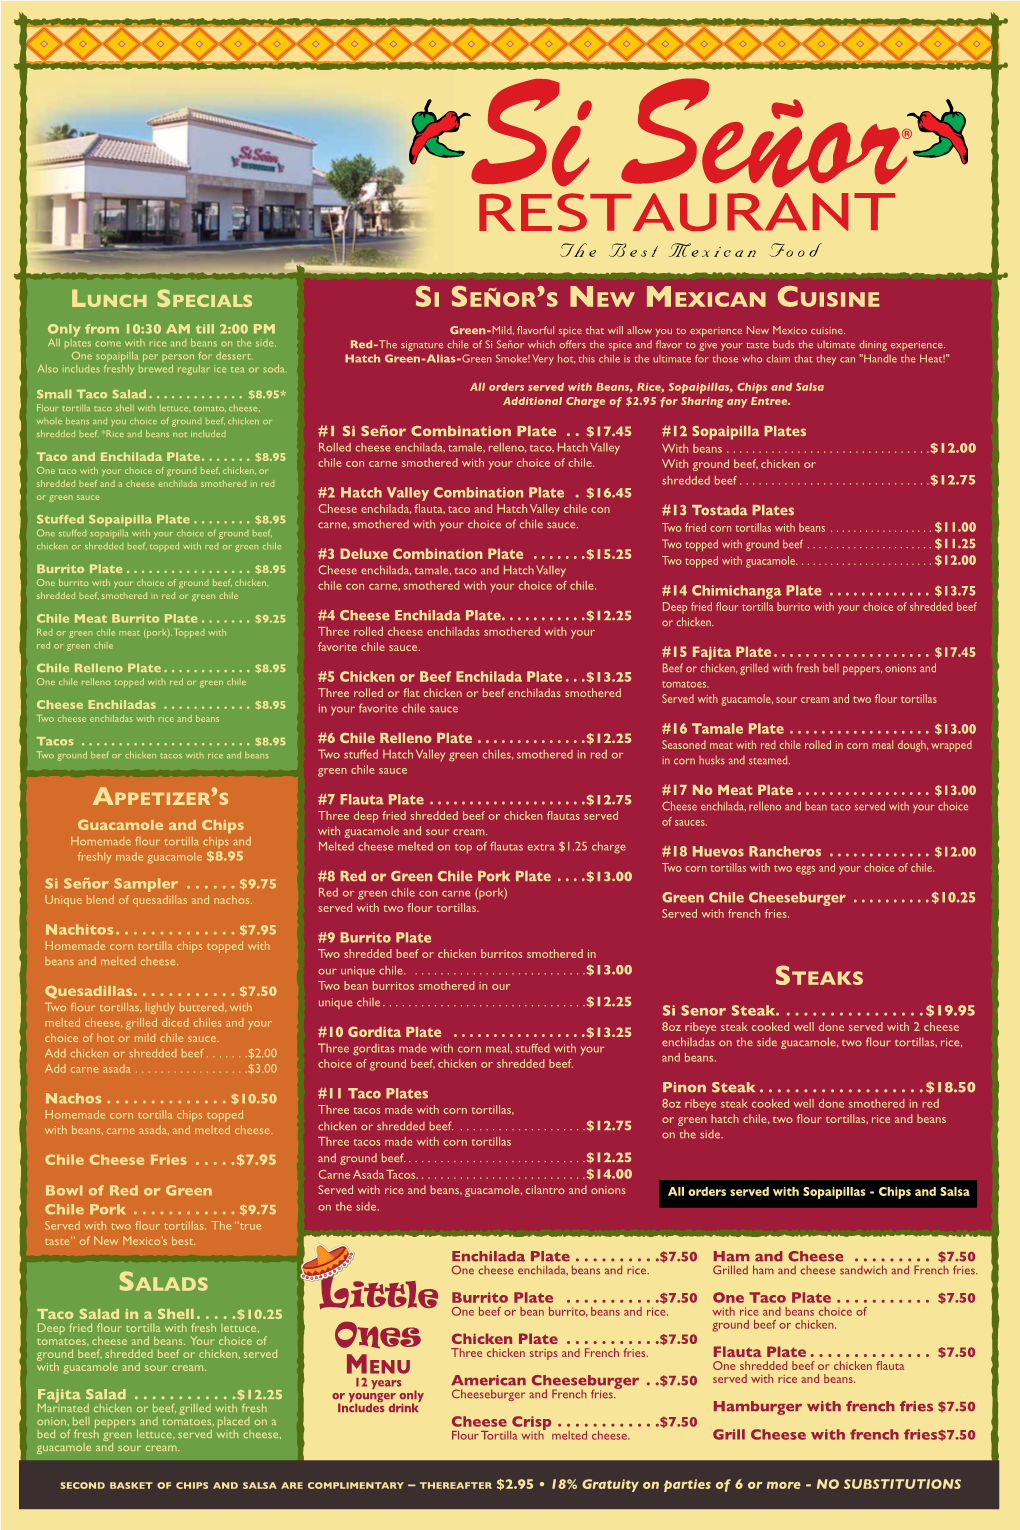 Si Senor Margaritas Burritos: Each Margarita In-House Created! Ground Beef with Chile Smothered